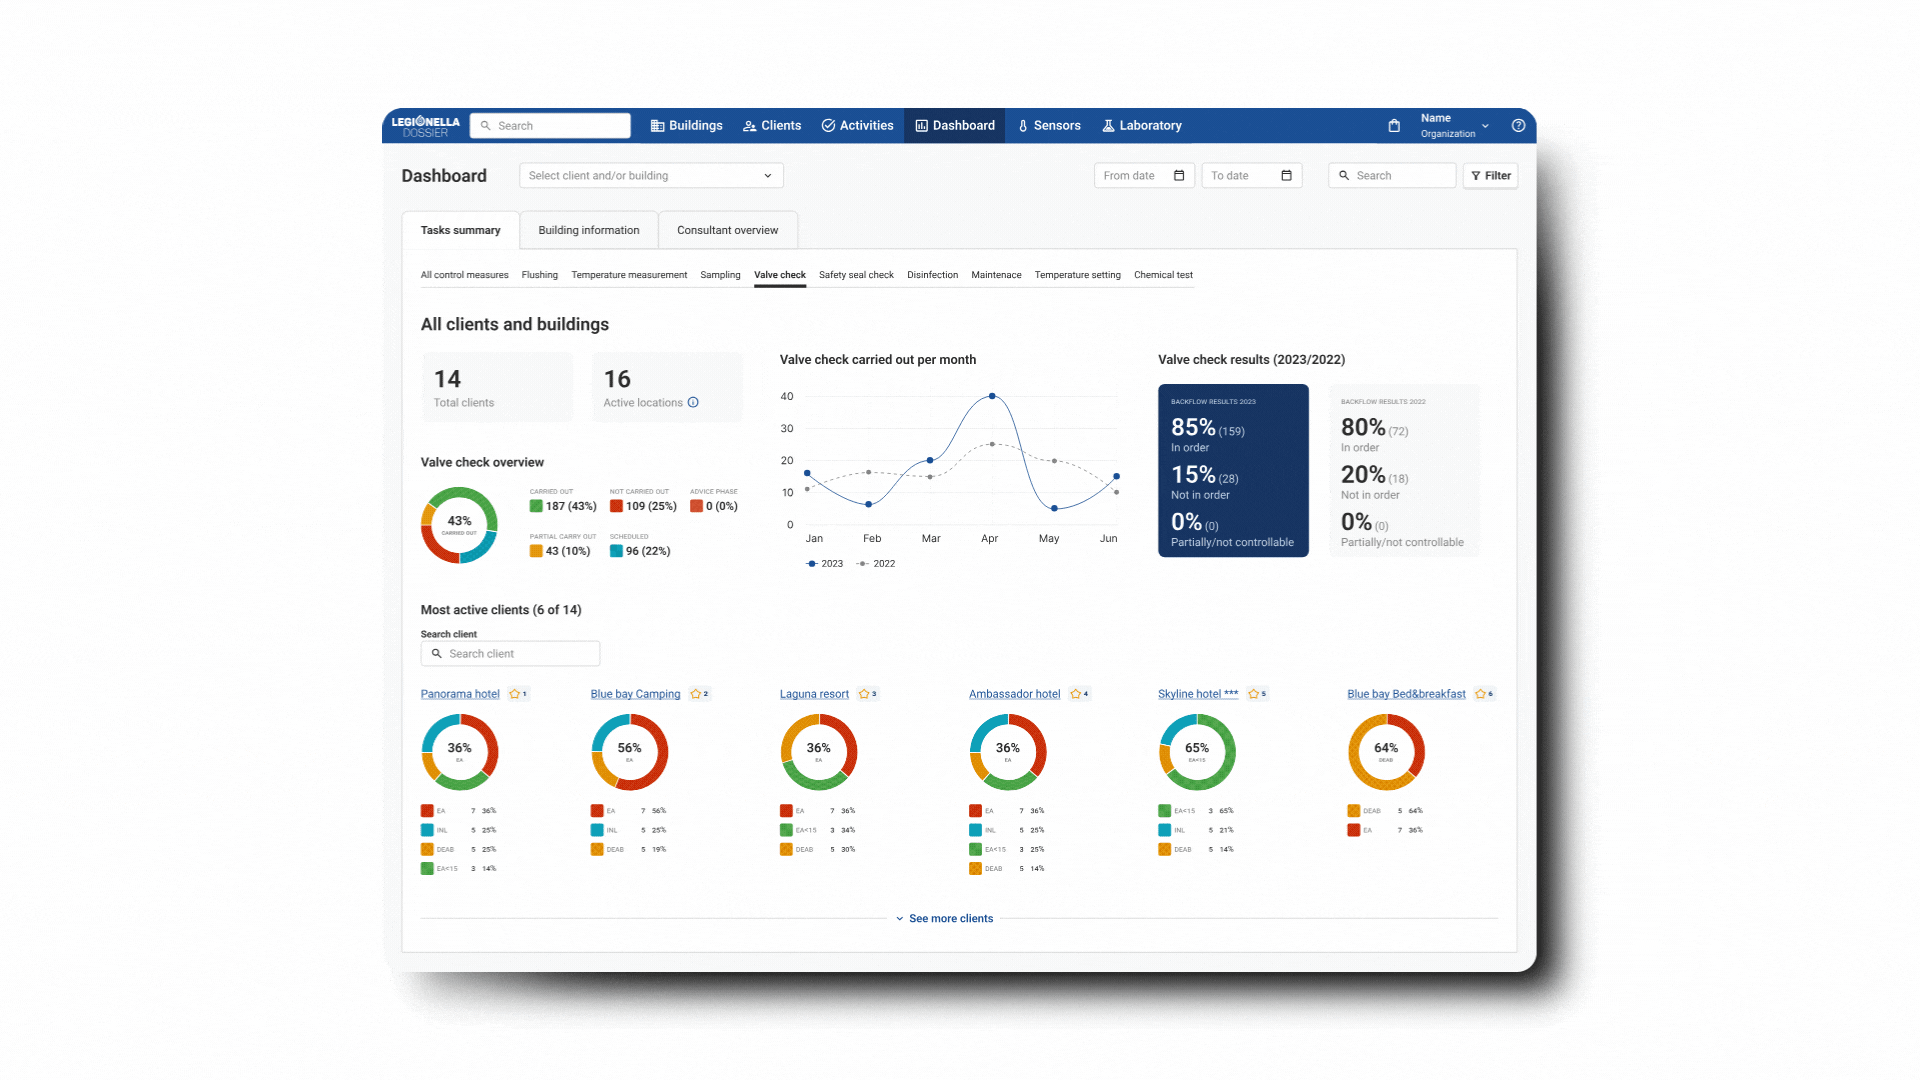 New dashboards LD 1.3 release